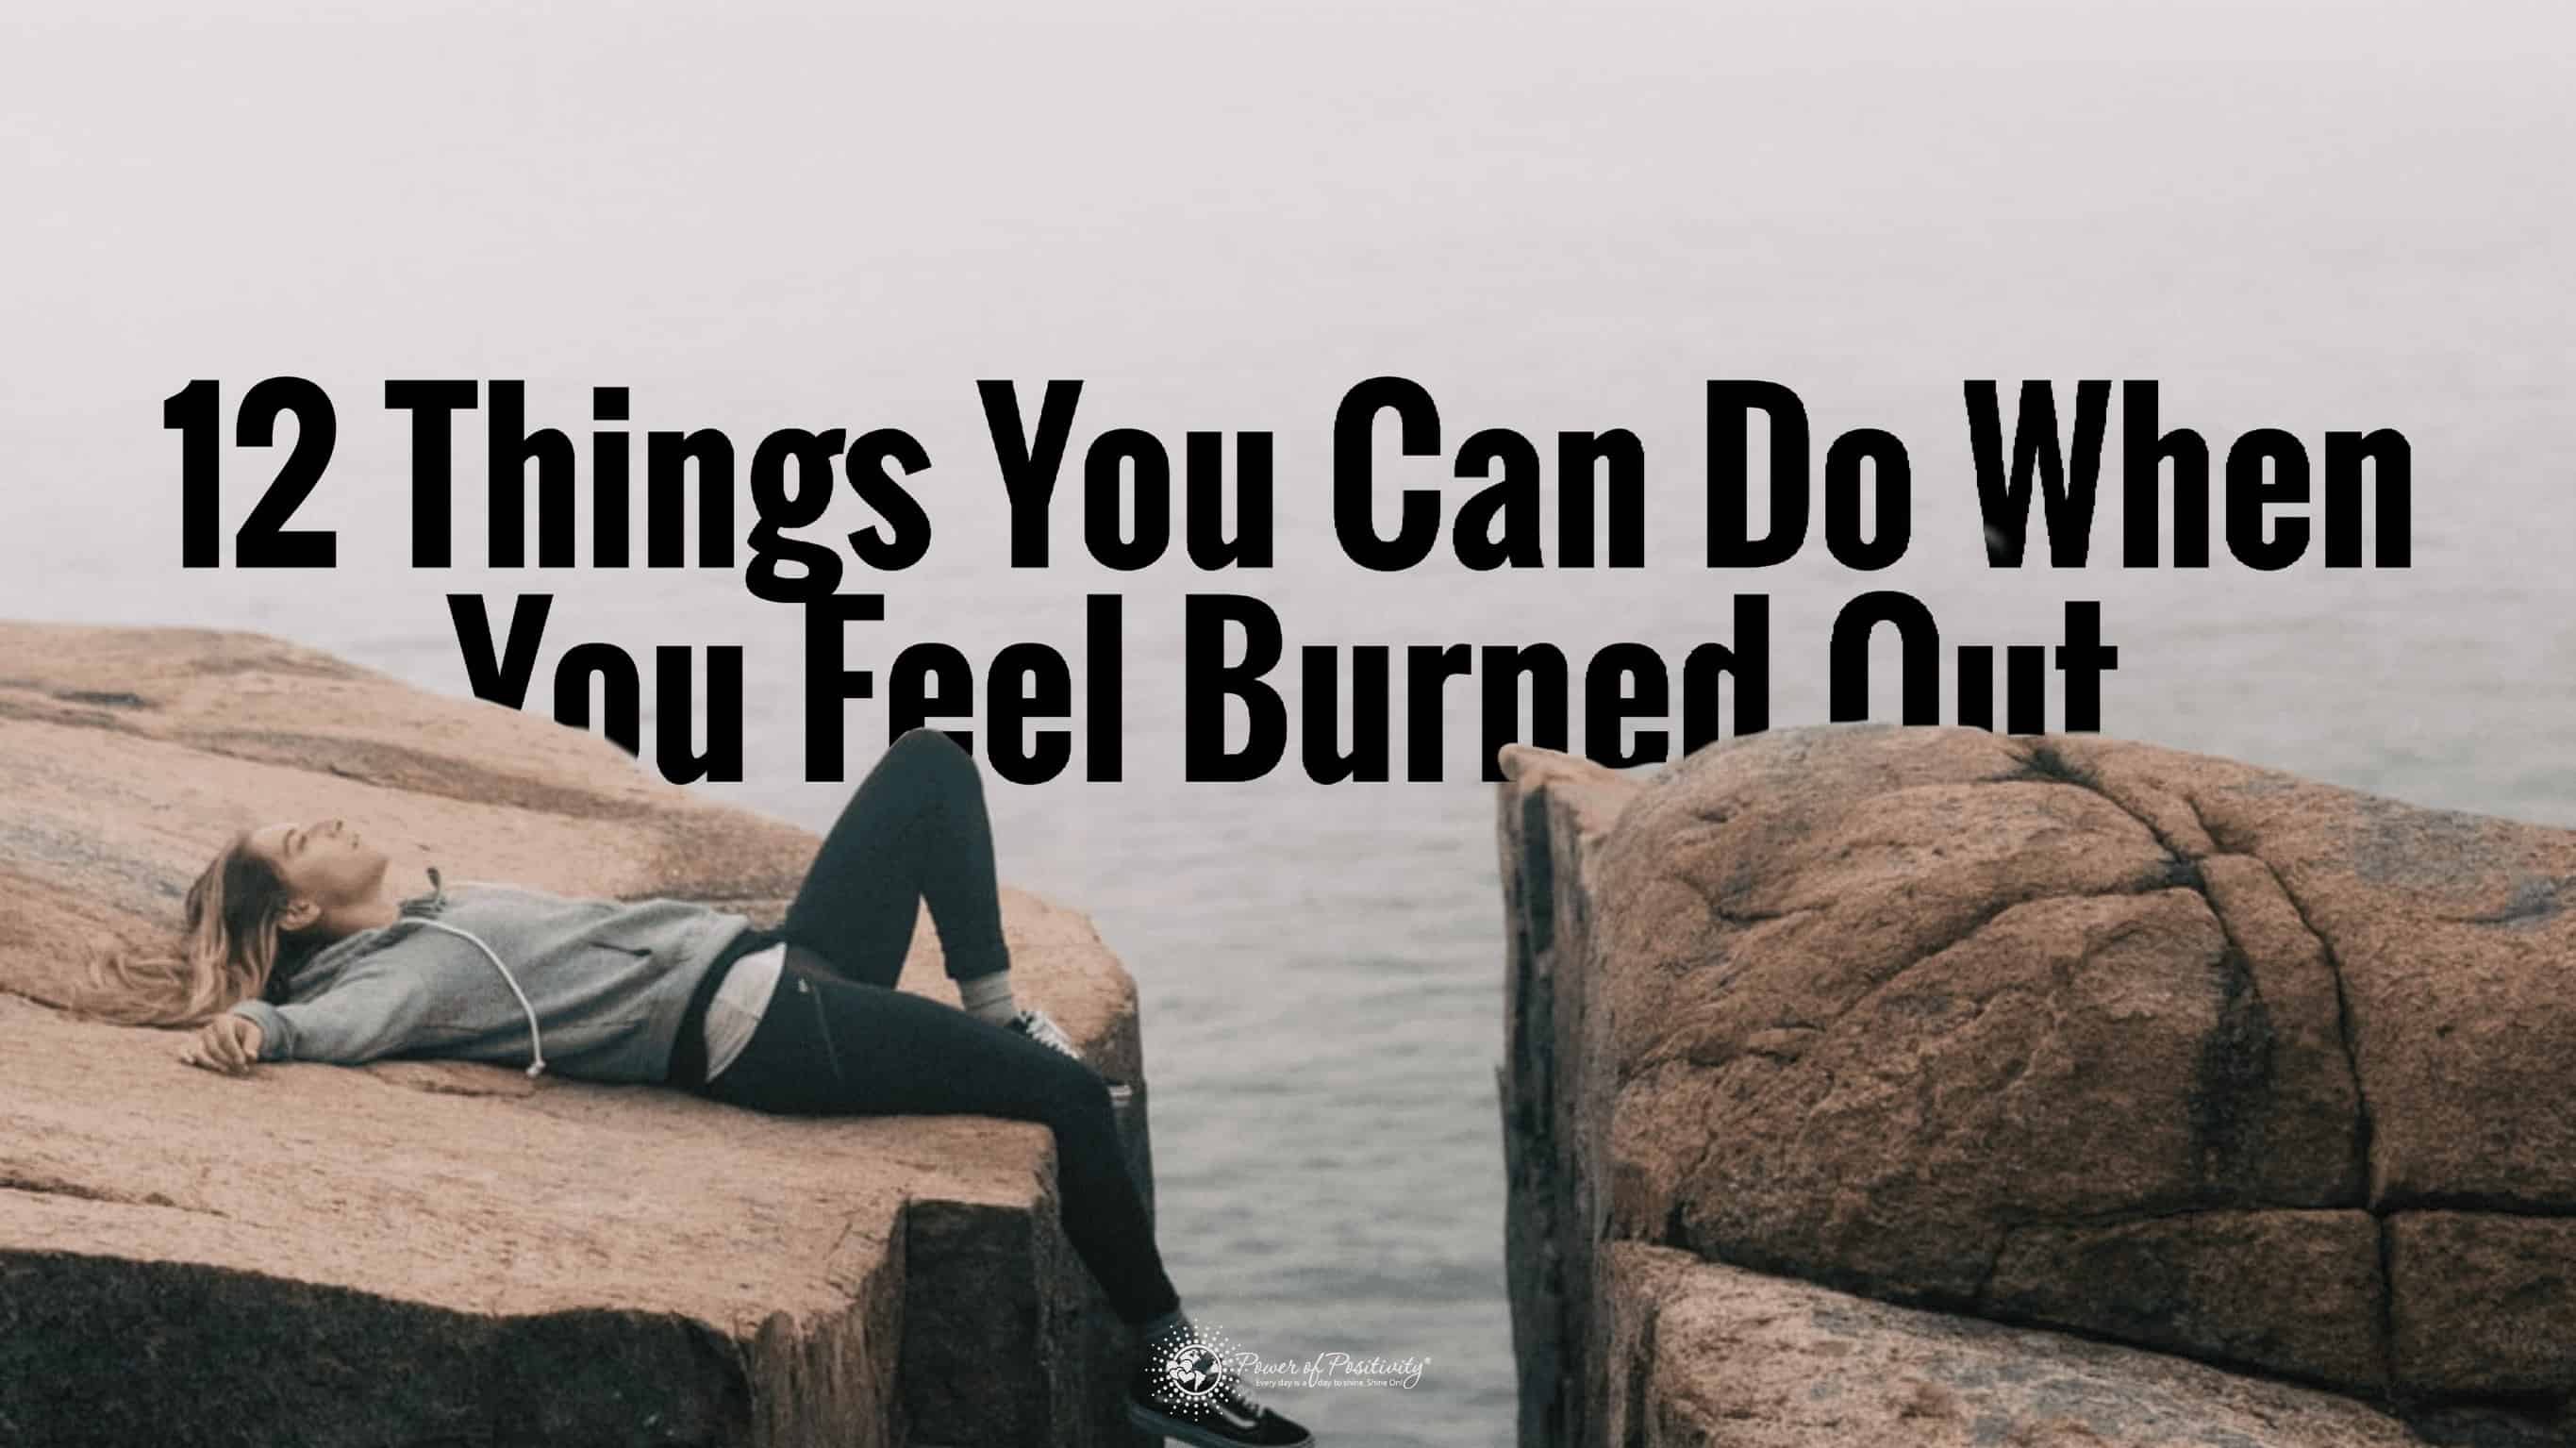 12 Things You Can Do When You Feel Burned Out